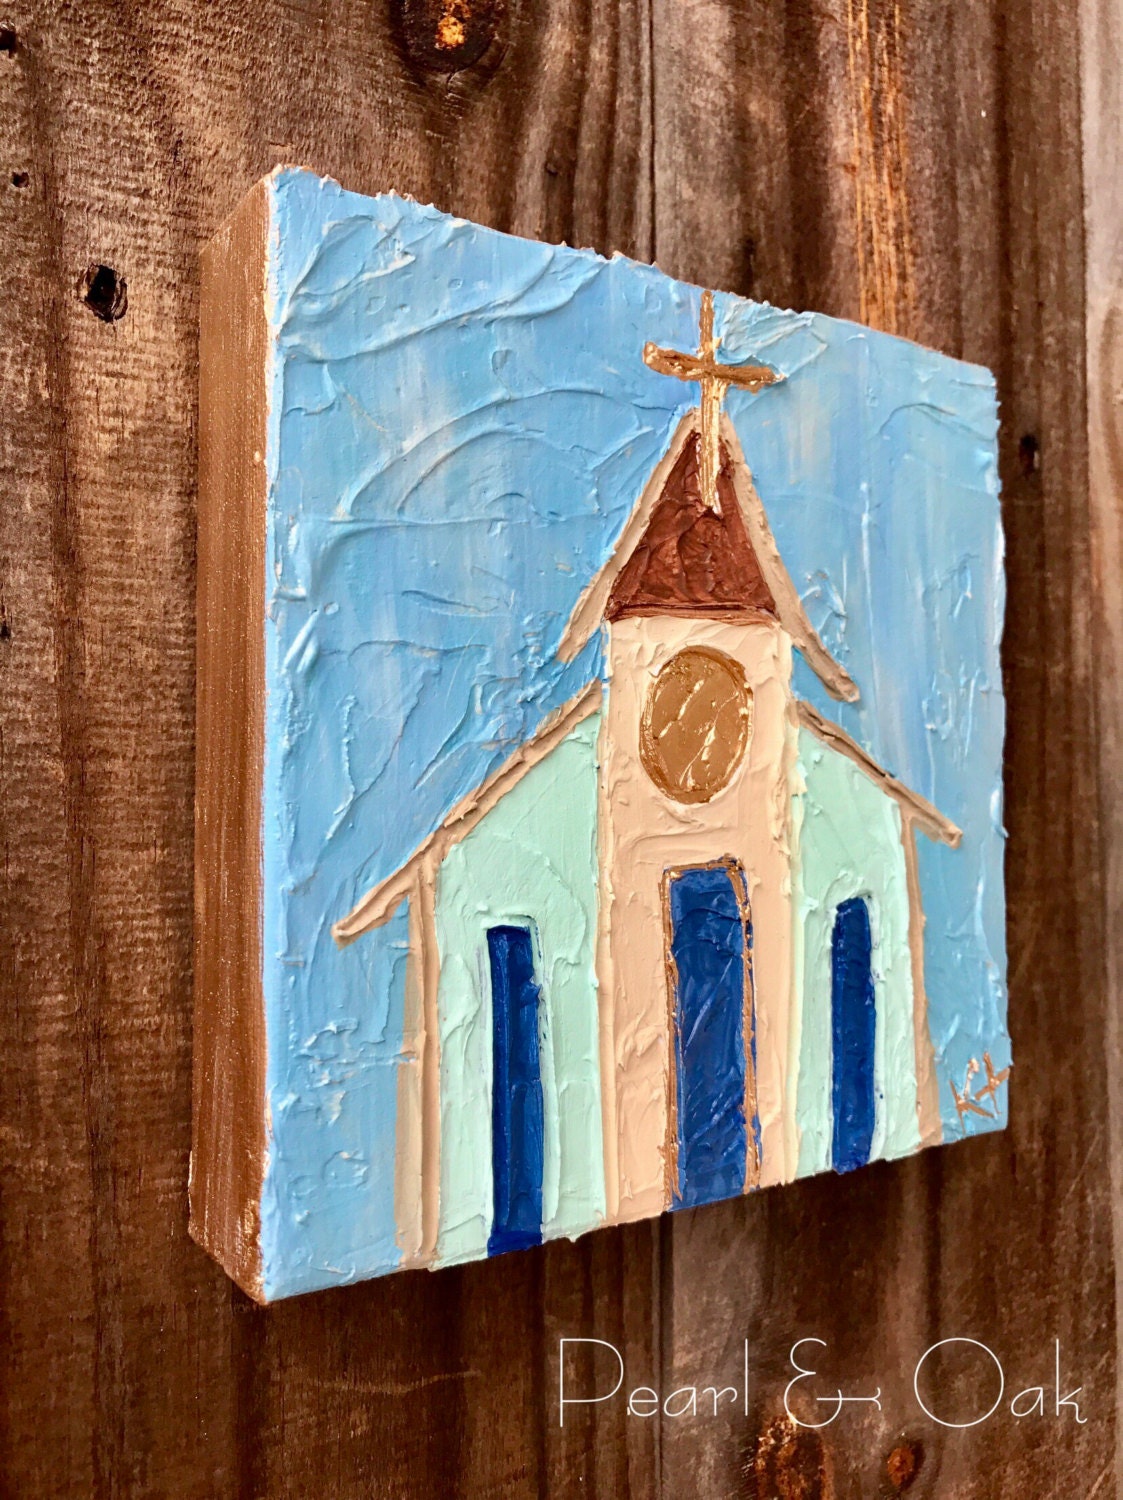 Church in Color 🍁 Acrylic on 6x6 canvas : r/painting